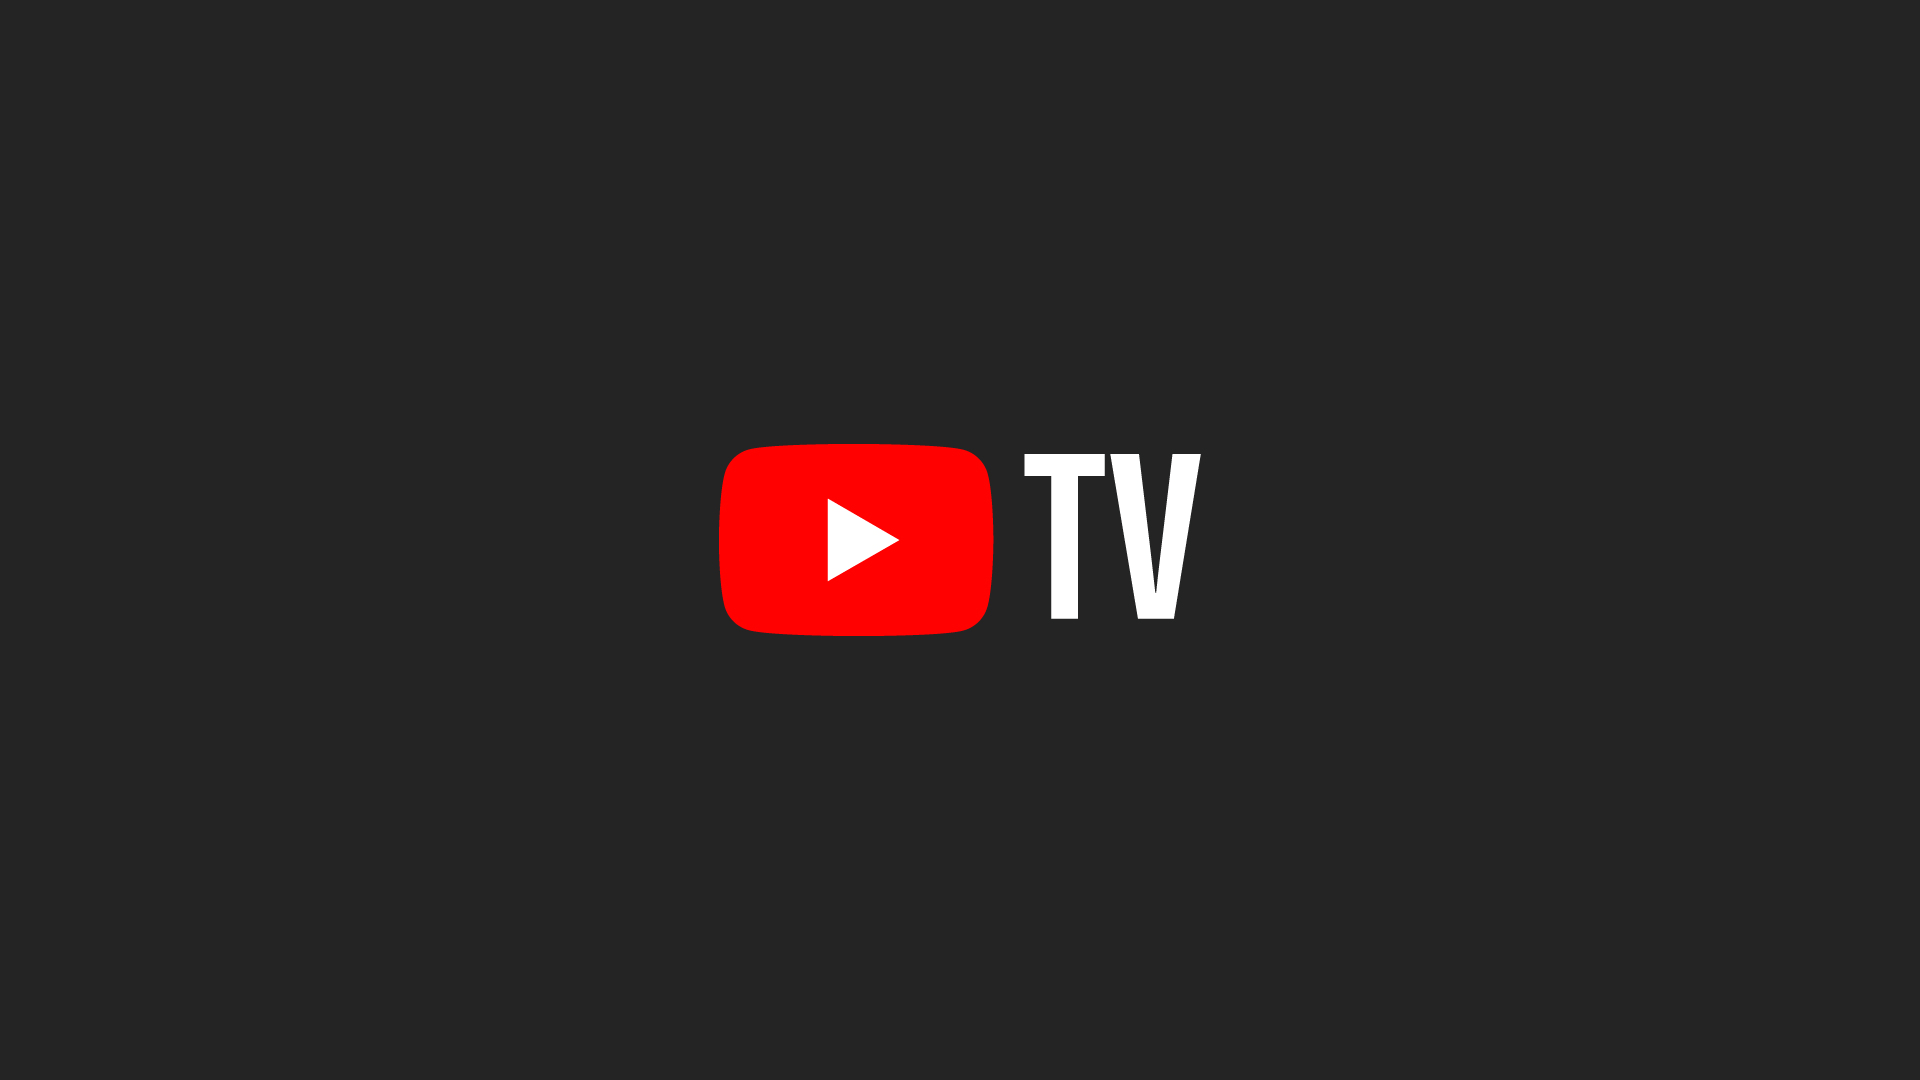 YouTube TV is Offering a 2-Week Free Trial Perfect For PlayStation Vue Subscribers